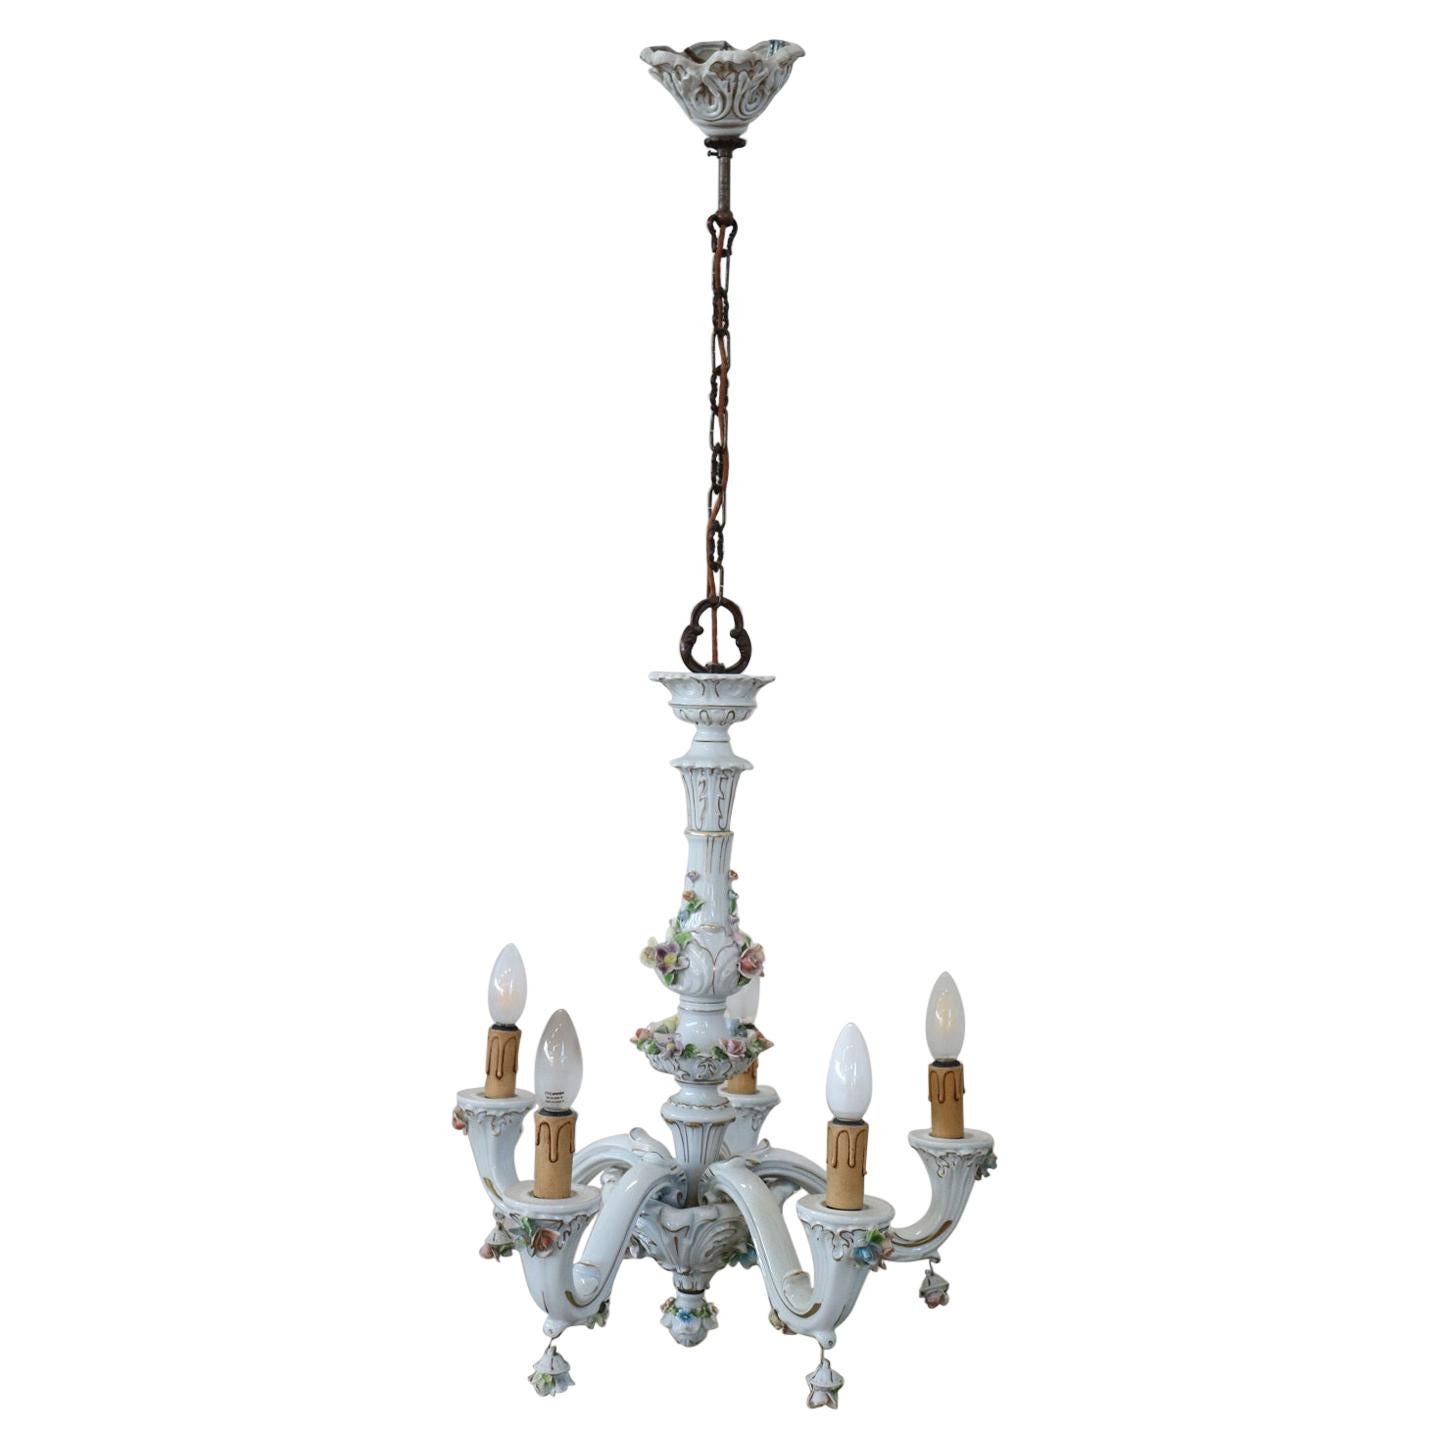 20th Century Italian Porcelain Chandelier Decorated with Flowers